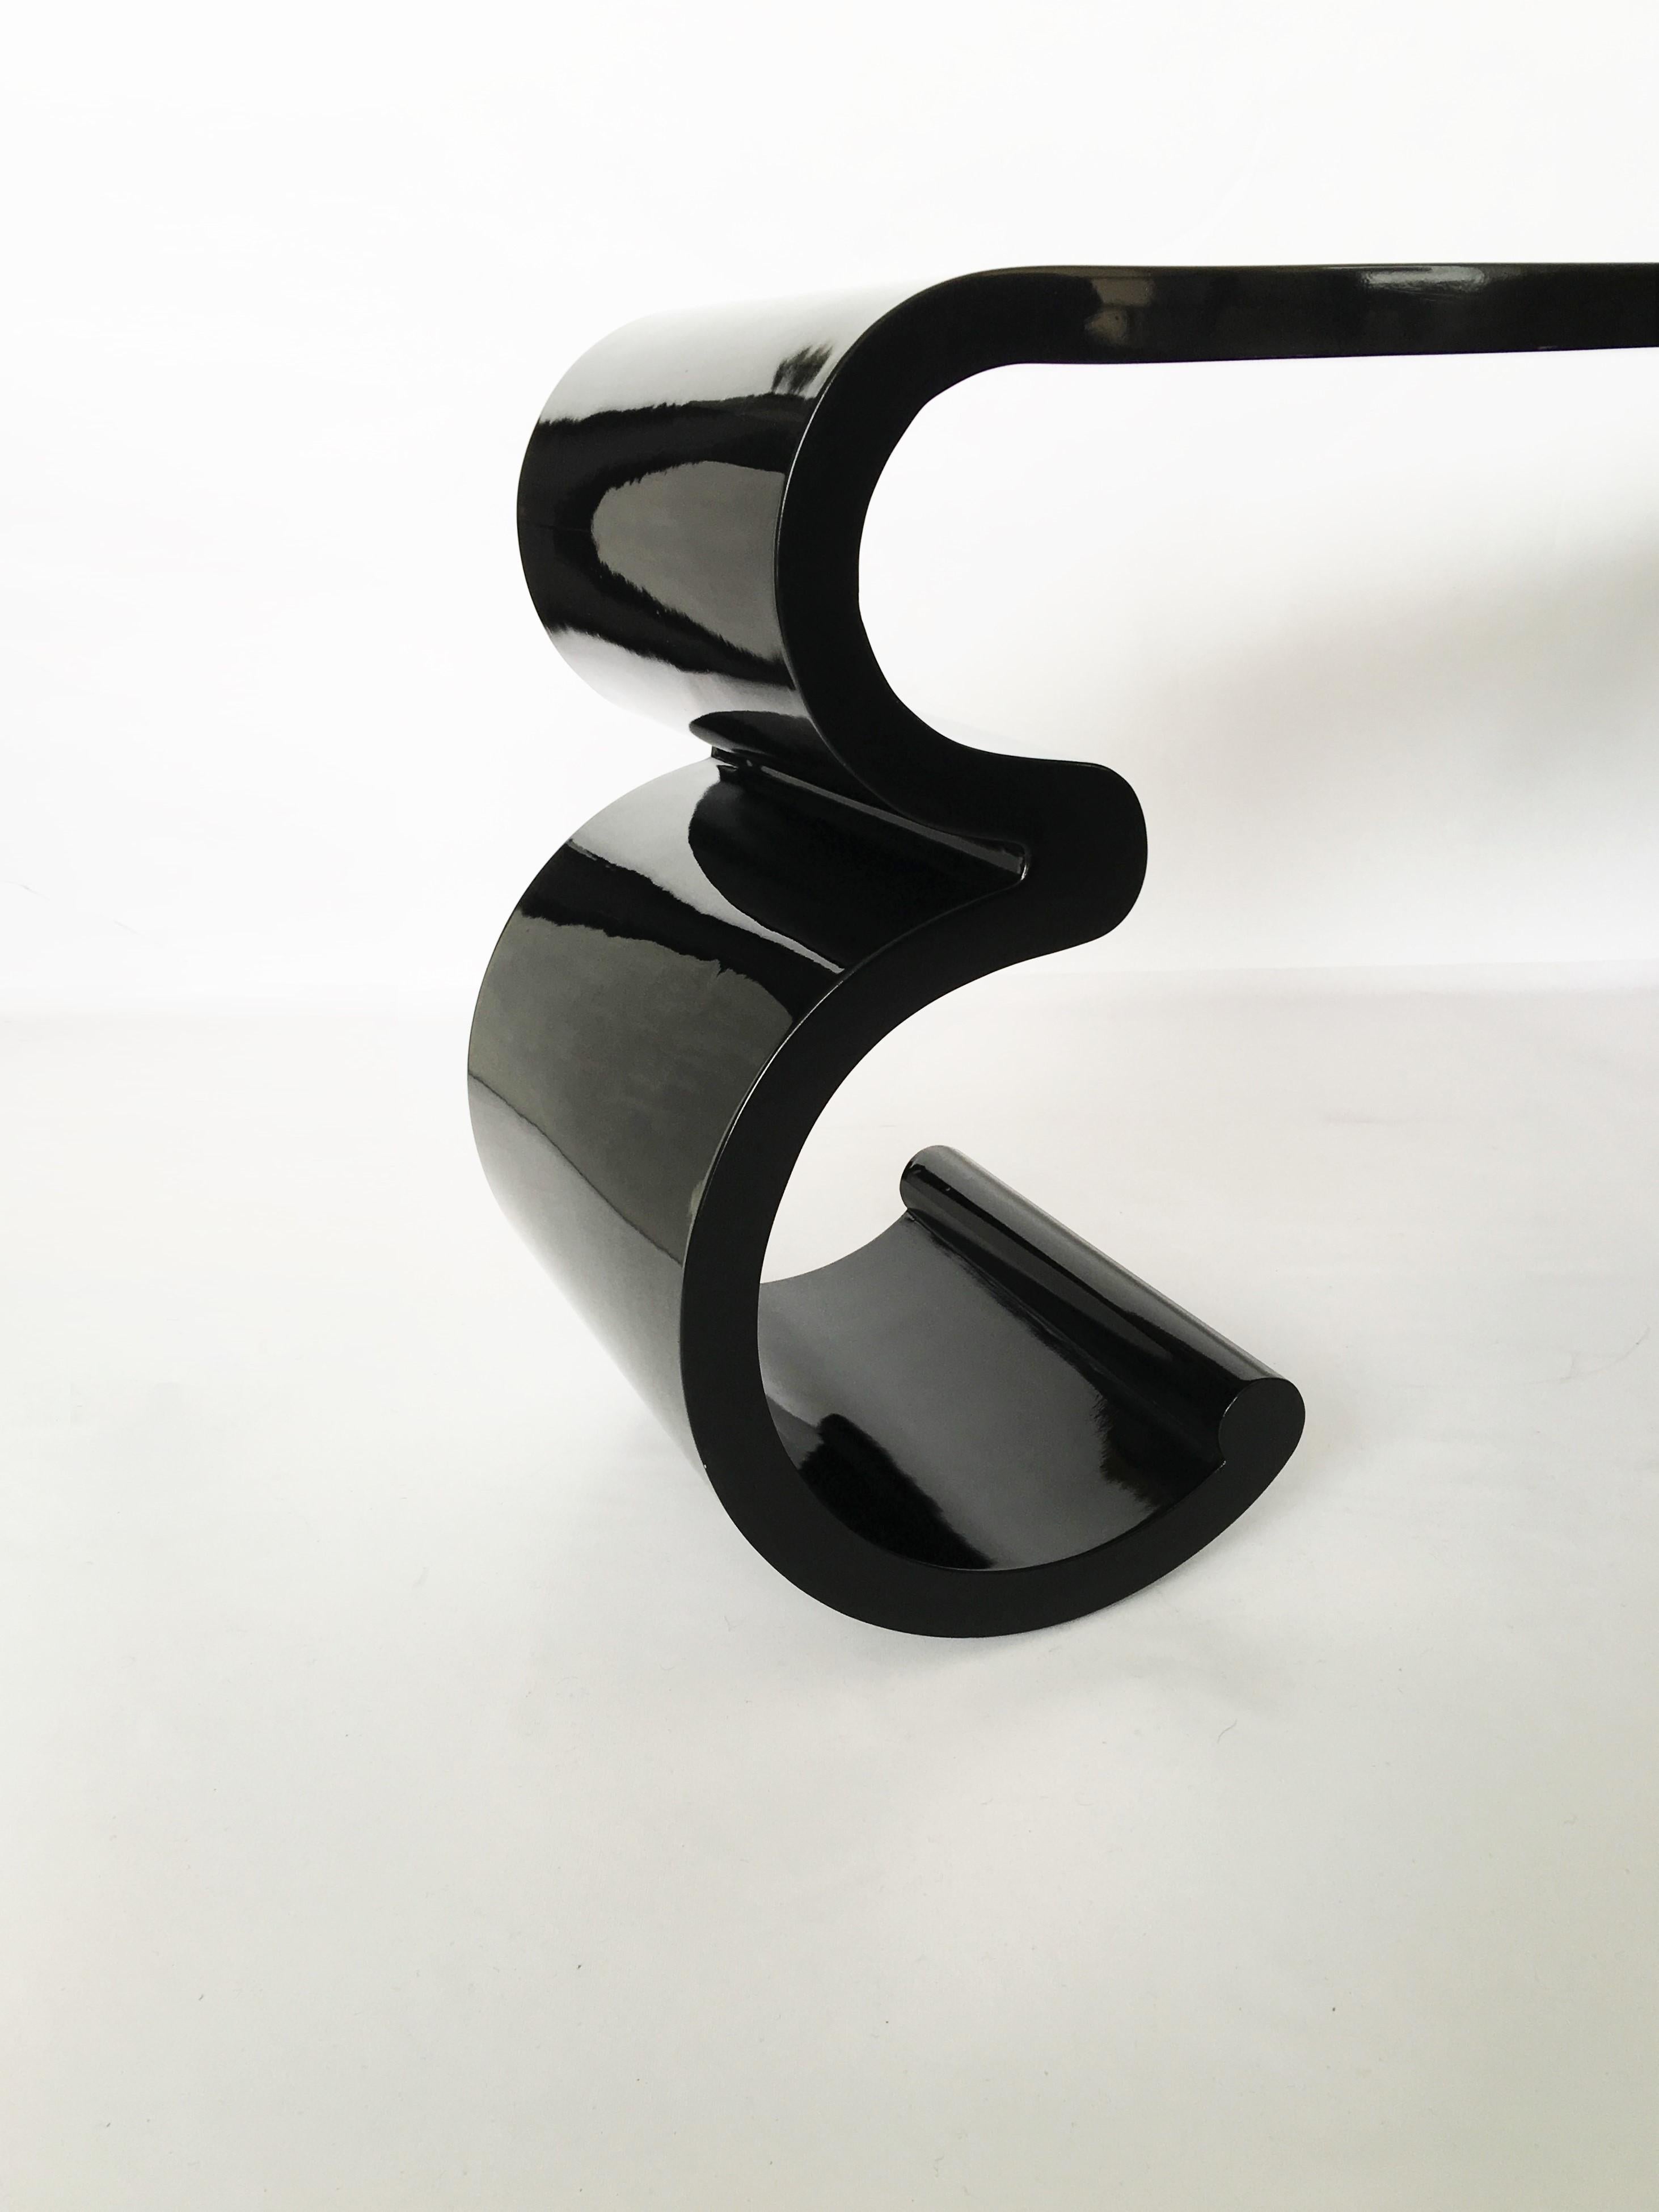 Sensational and dramatic console table with geometric profile in the manner of Karl Springer features a glossy black lacquer finish. Outstanding piece with great presence and exceptional design.